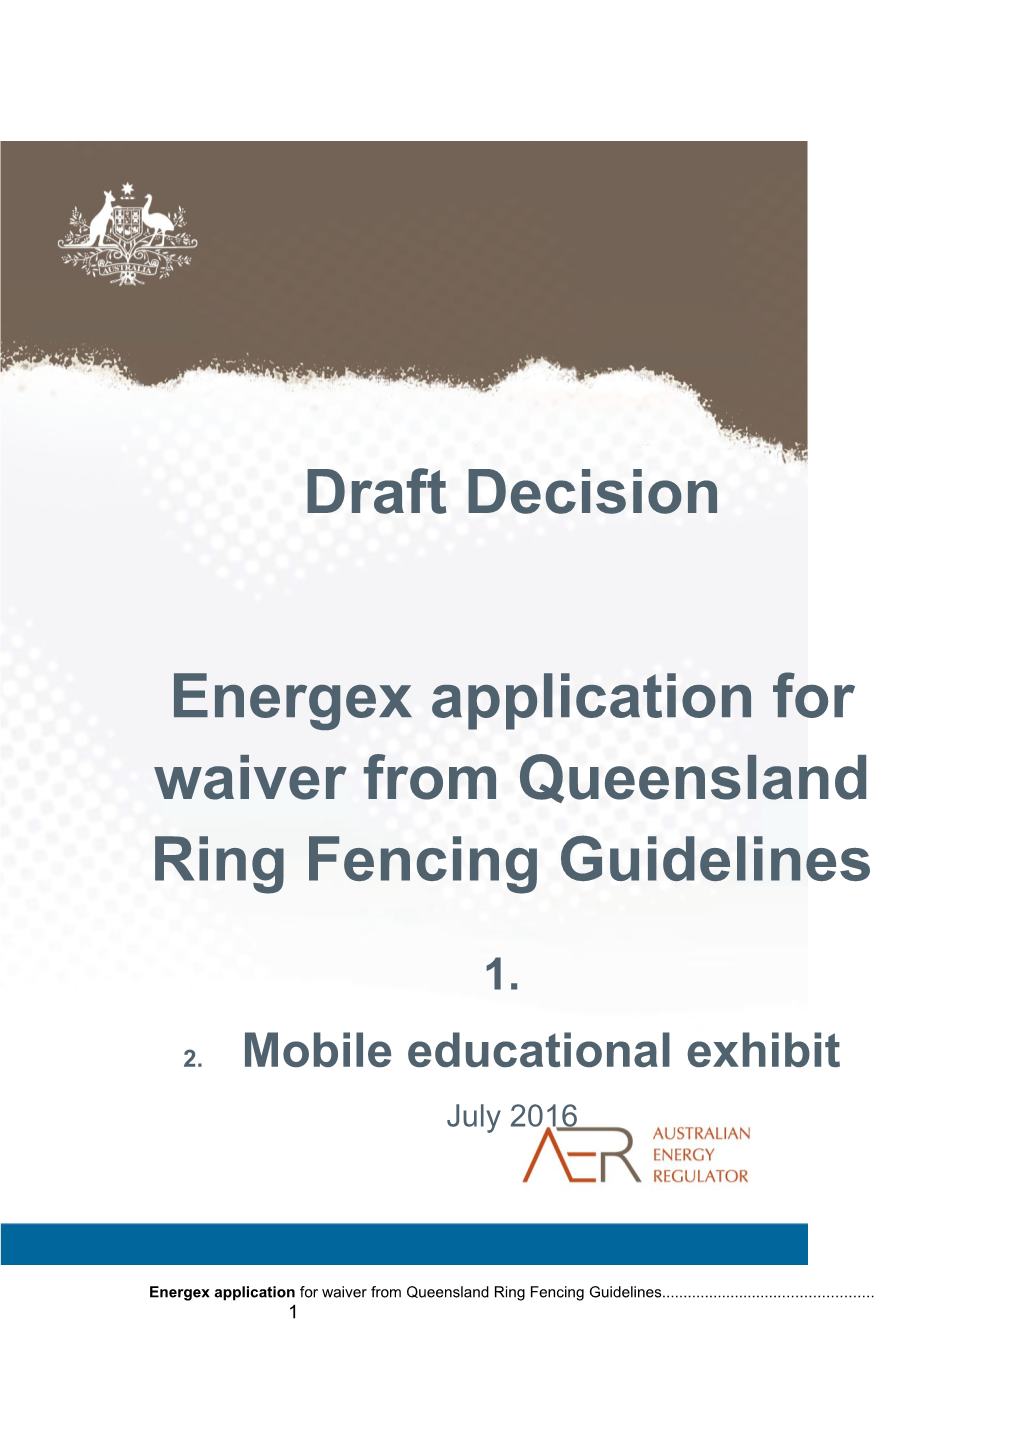 Energex Application for Waiver from Queensland Ring Fencing Guidelines